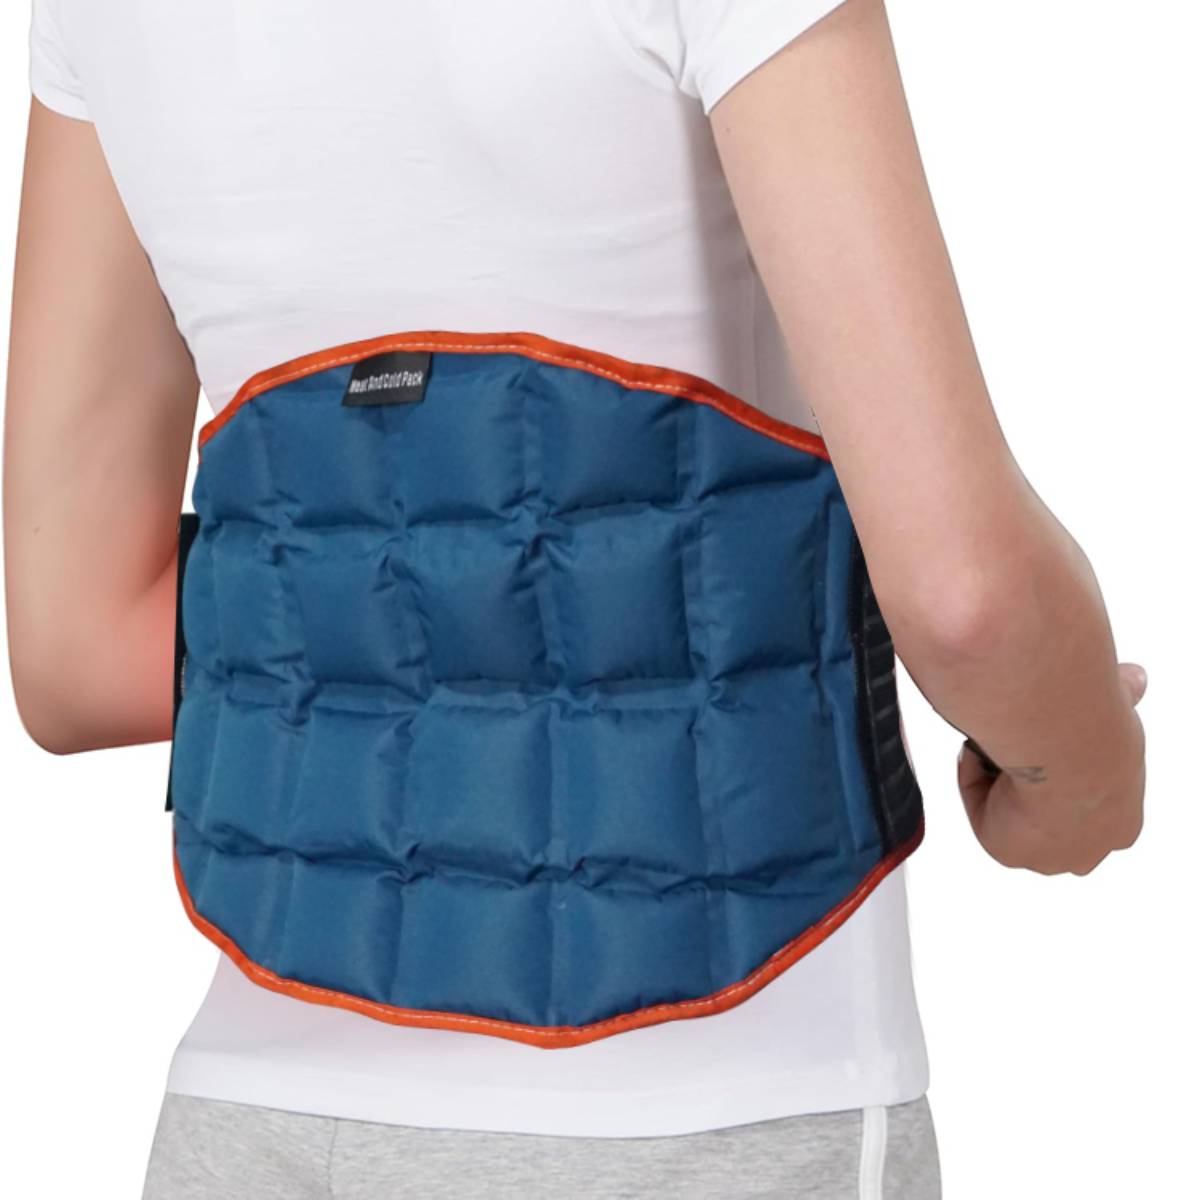 upgraded cryotherapy ice pack lightweight heat cold pack for waist Pain Relief Heating Pad